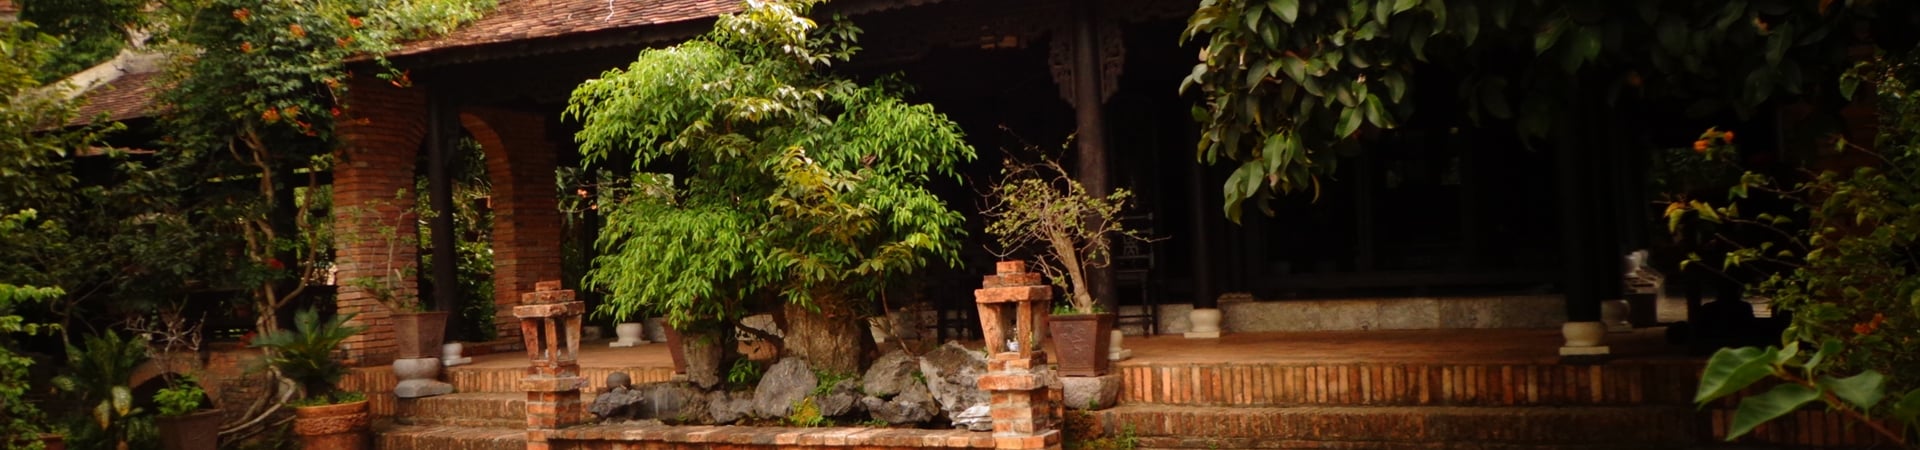 Image of The Garden Houses of Hue